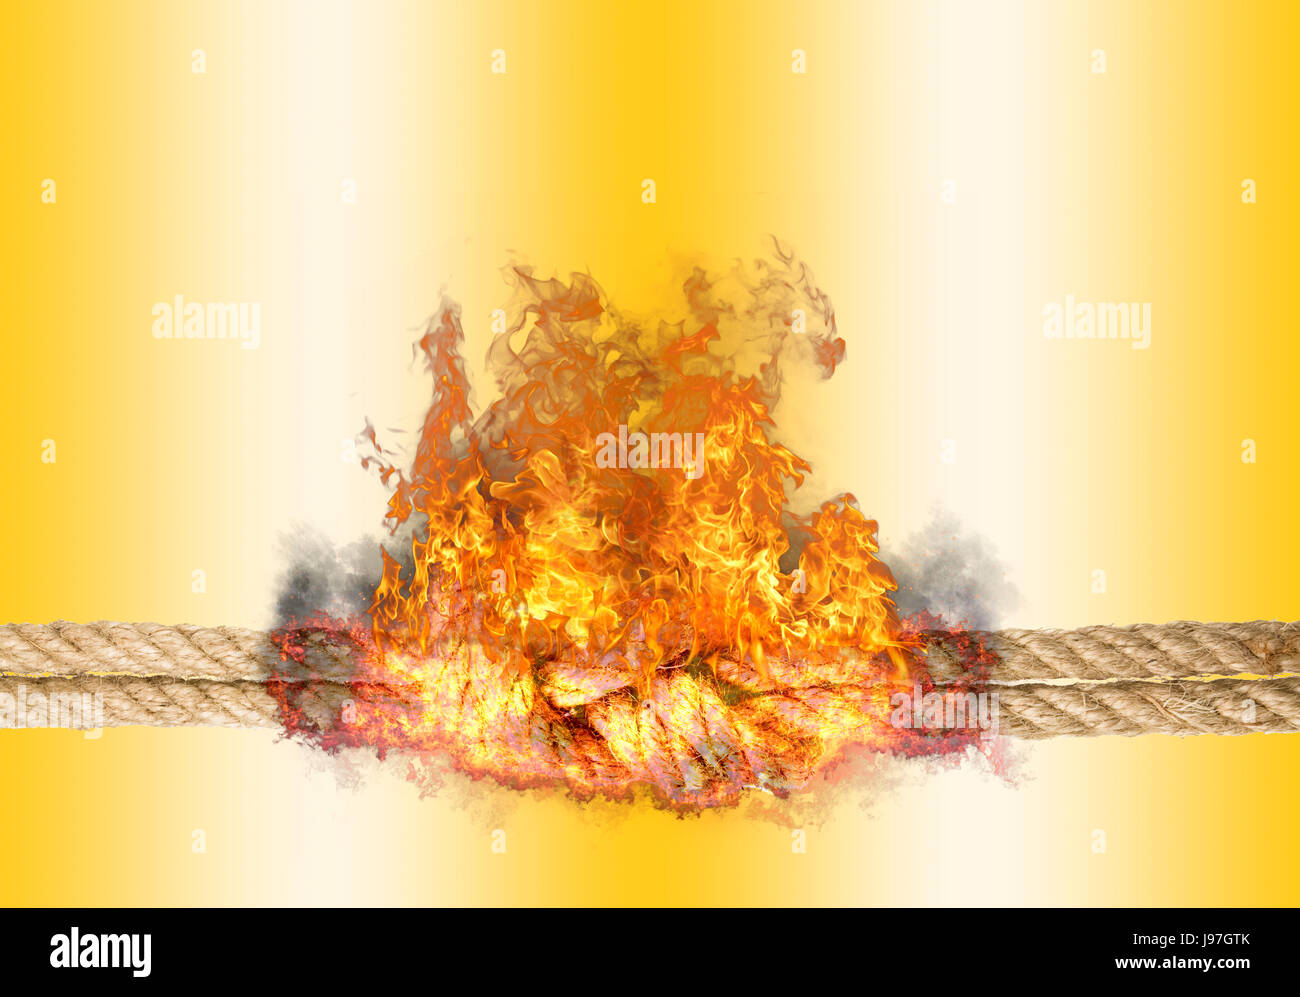 Strong rope with a knot, bursted into flames, isolated against the golden colored background Stock Photo